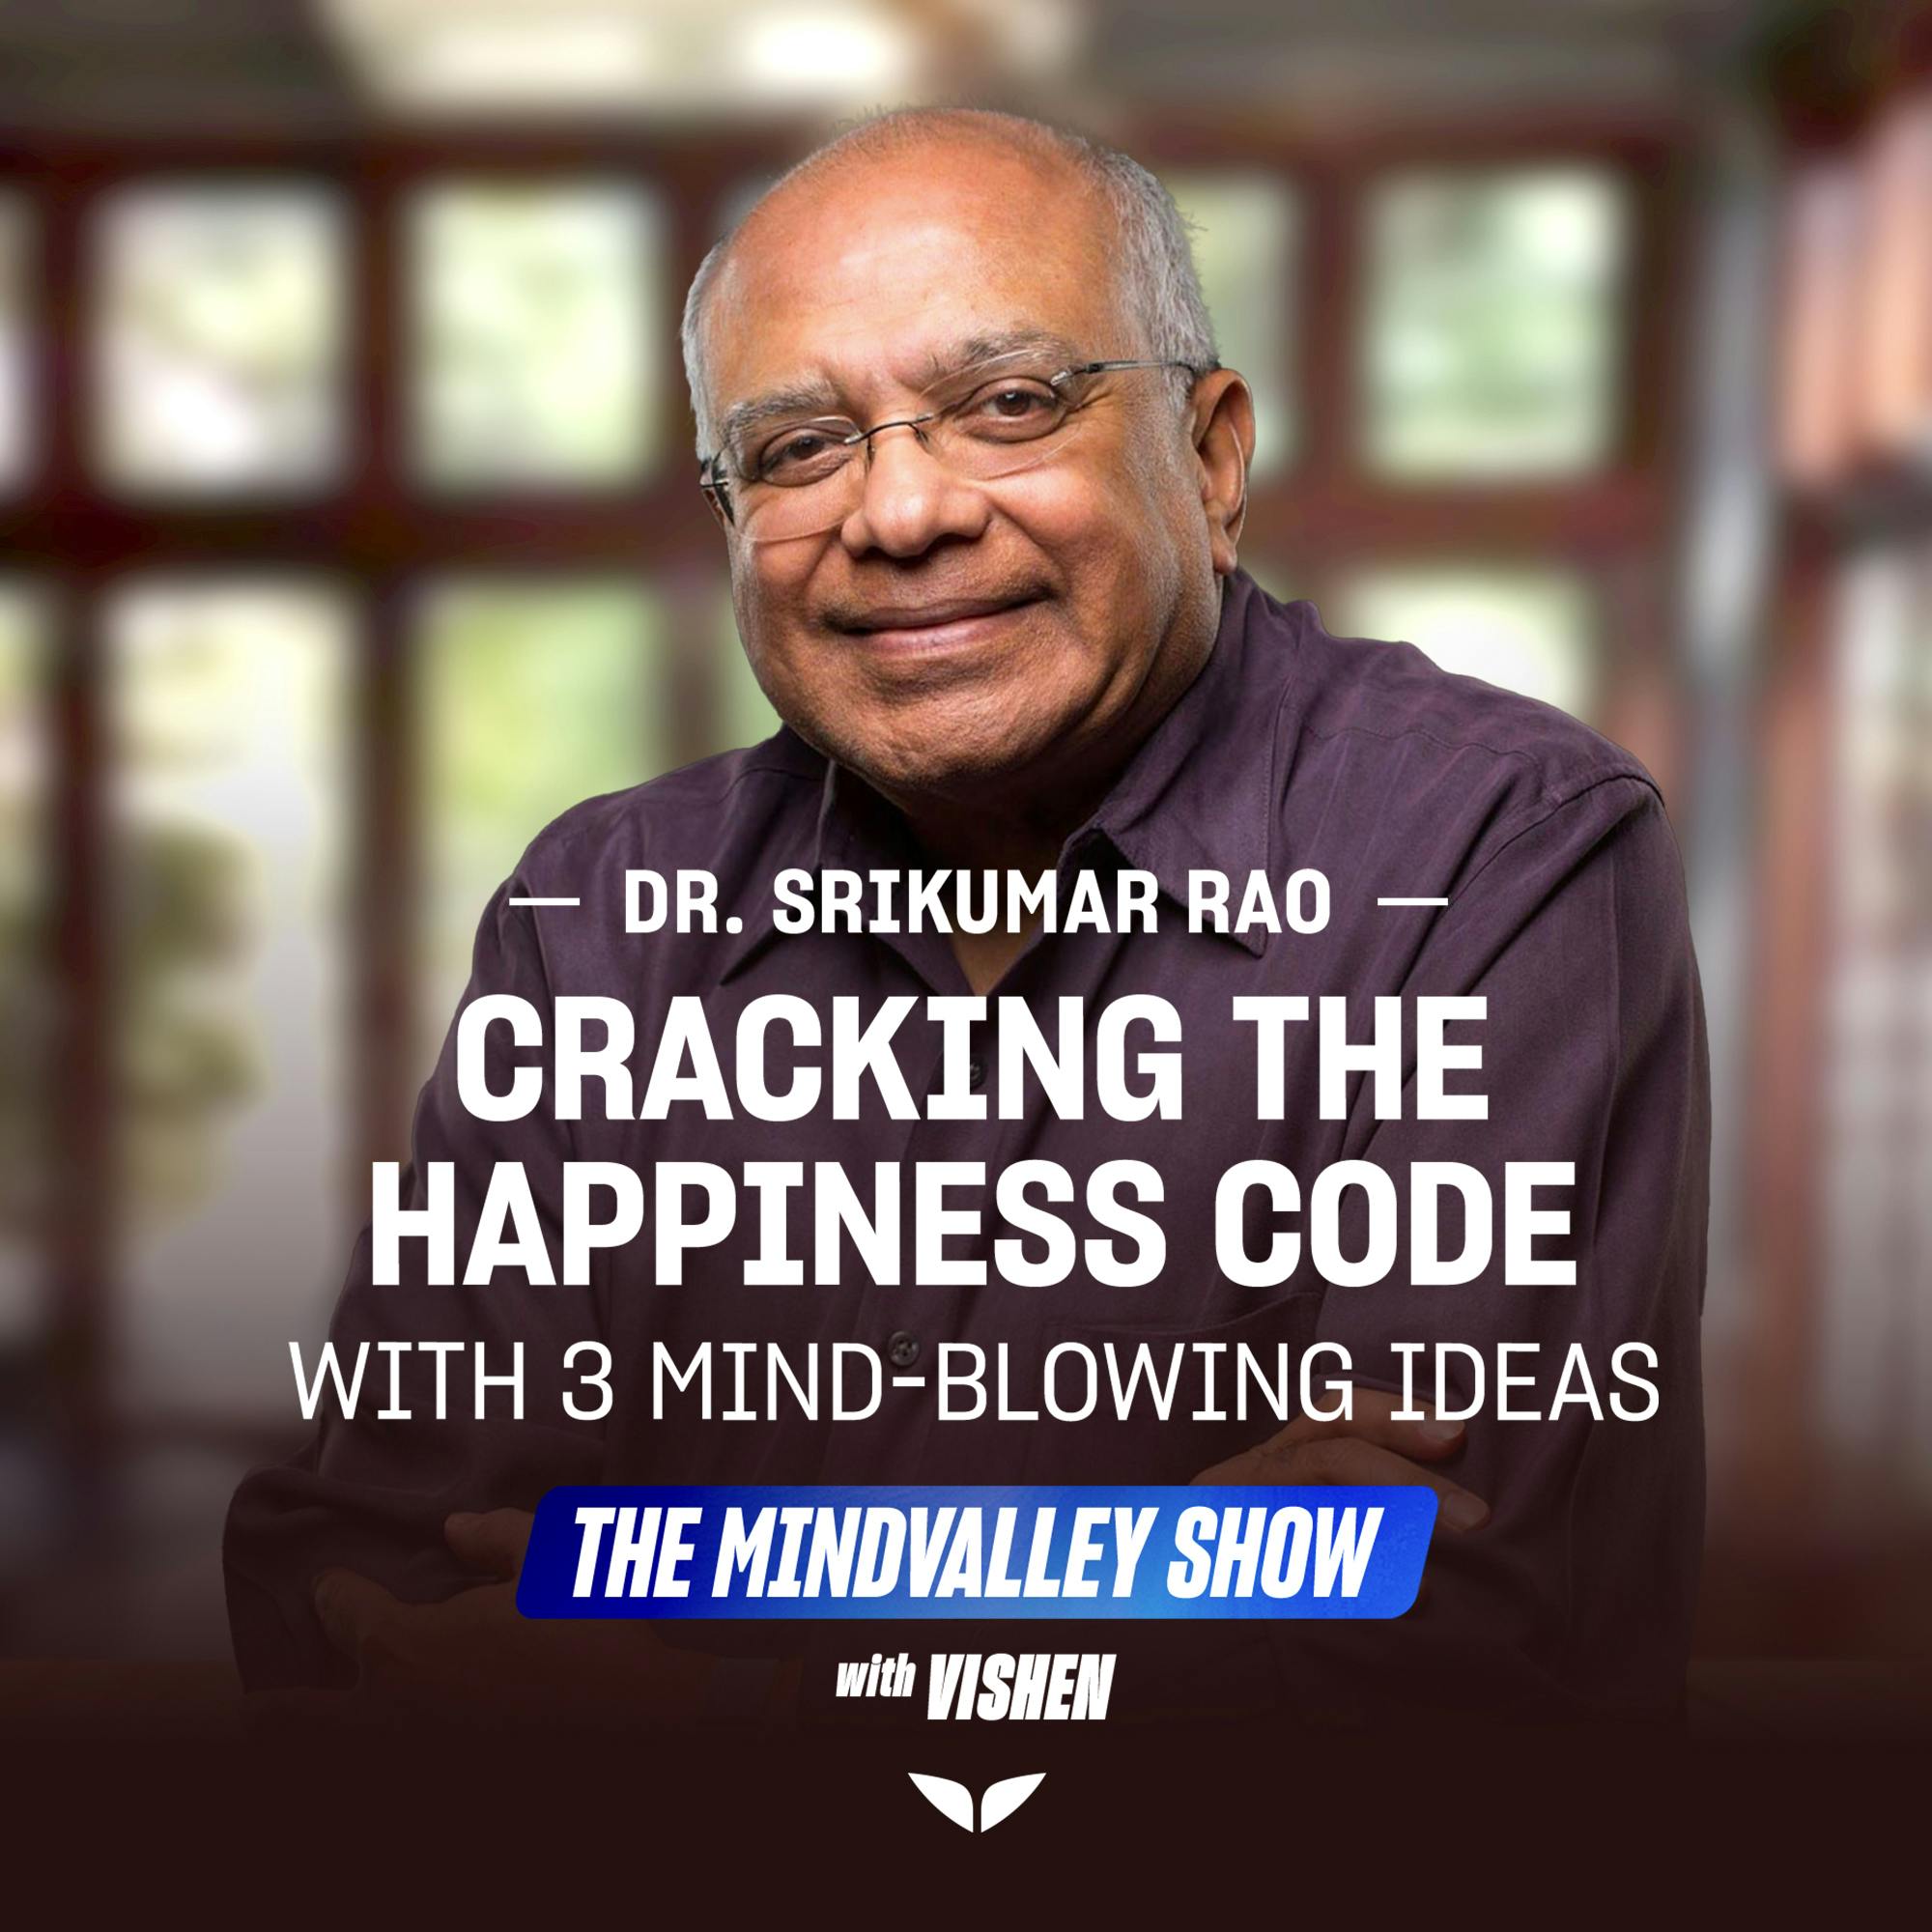 Cracking the Happiness Code with 3 Mind-Blowing Ideas from Dr. Srikumar Rao